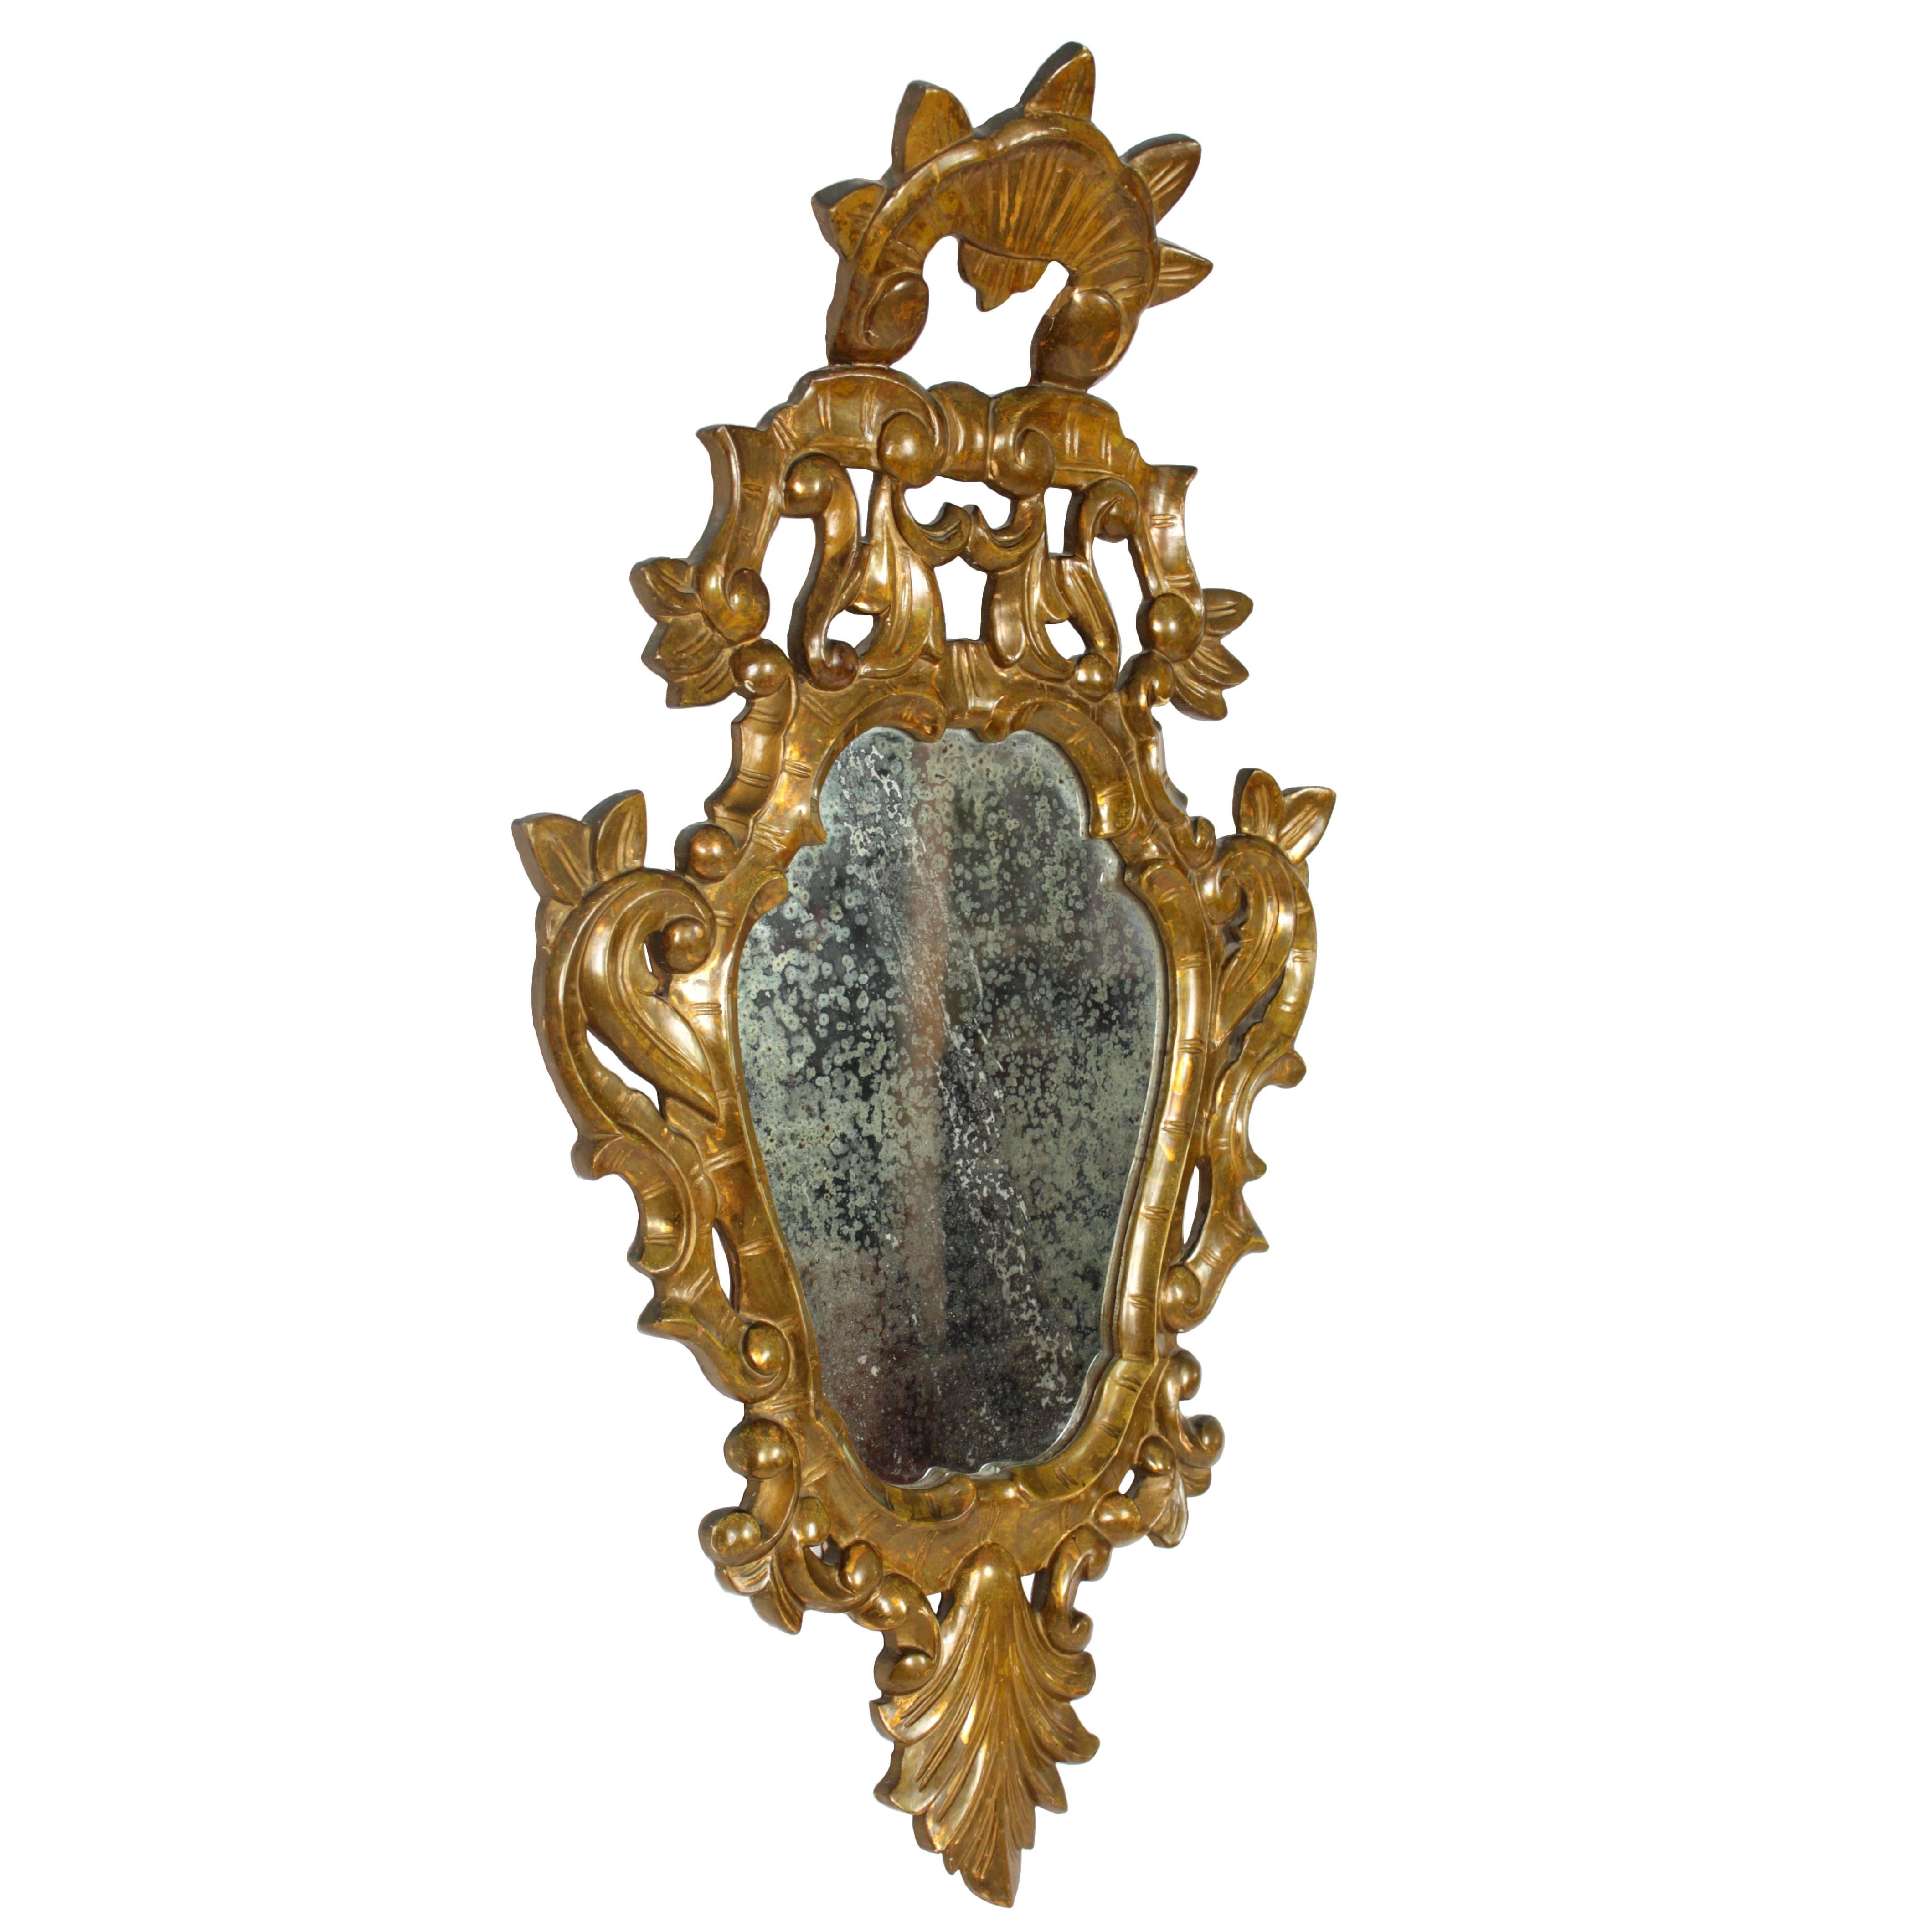 Spanish Rococo style giltwood mirror, finely carved and with a nice gold leaf patina. Spain, 19th century.
This piece wears its original mercury glass mirror. Spain, c.1890.

Avaliable more mirrors in this style and also in other styles:
Please